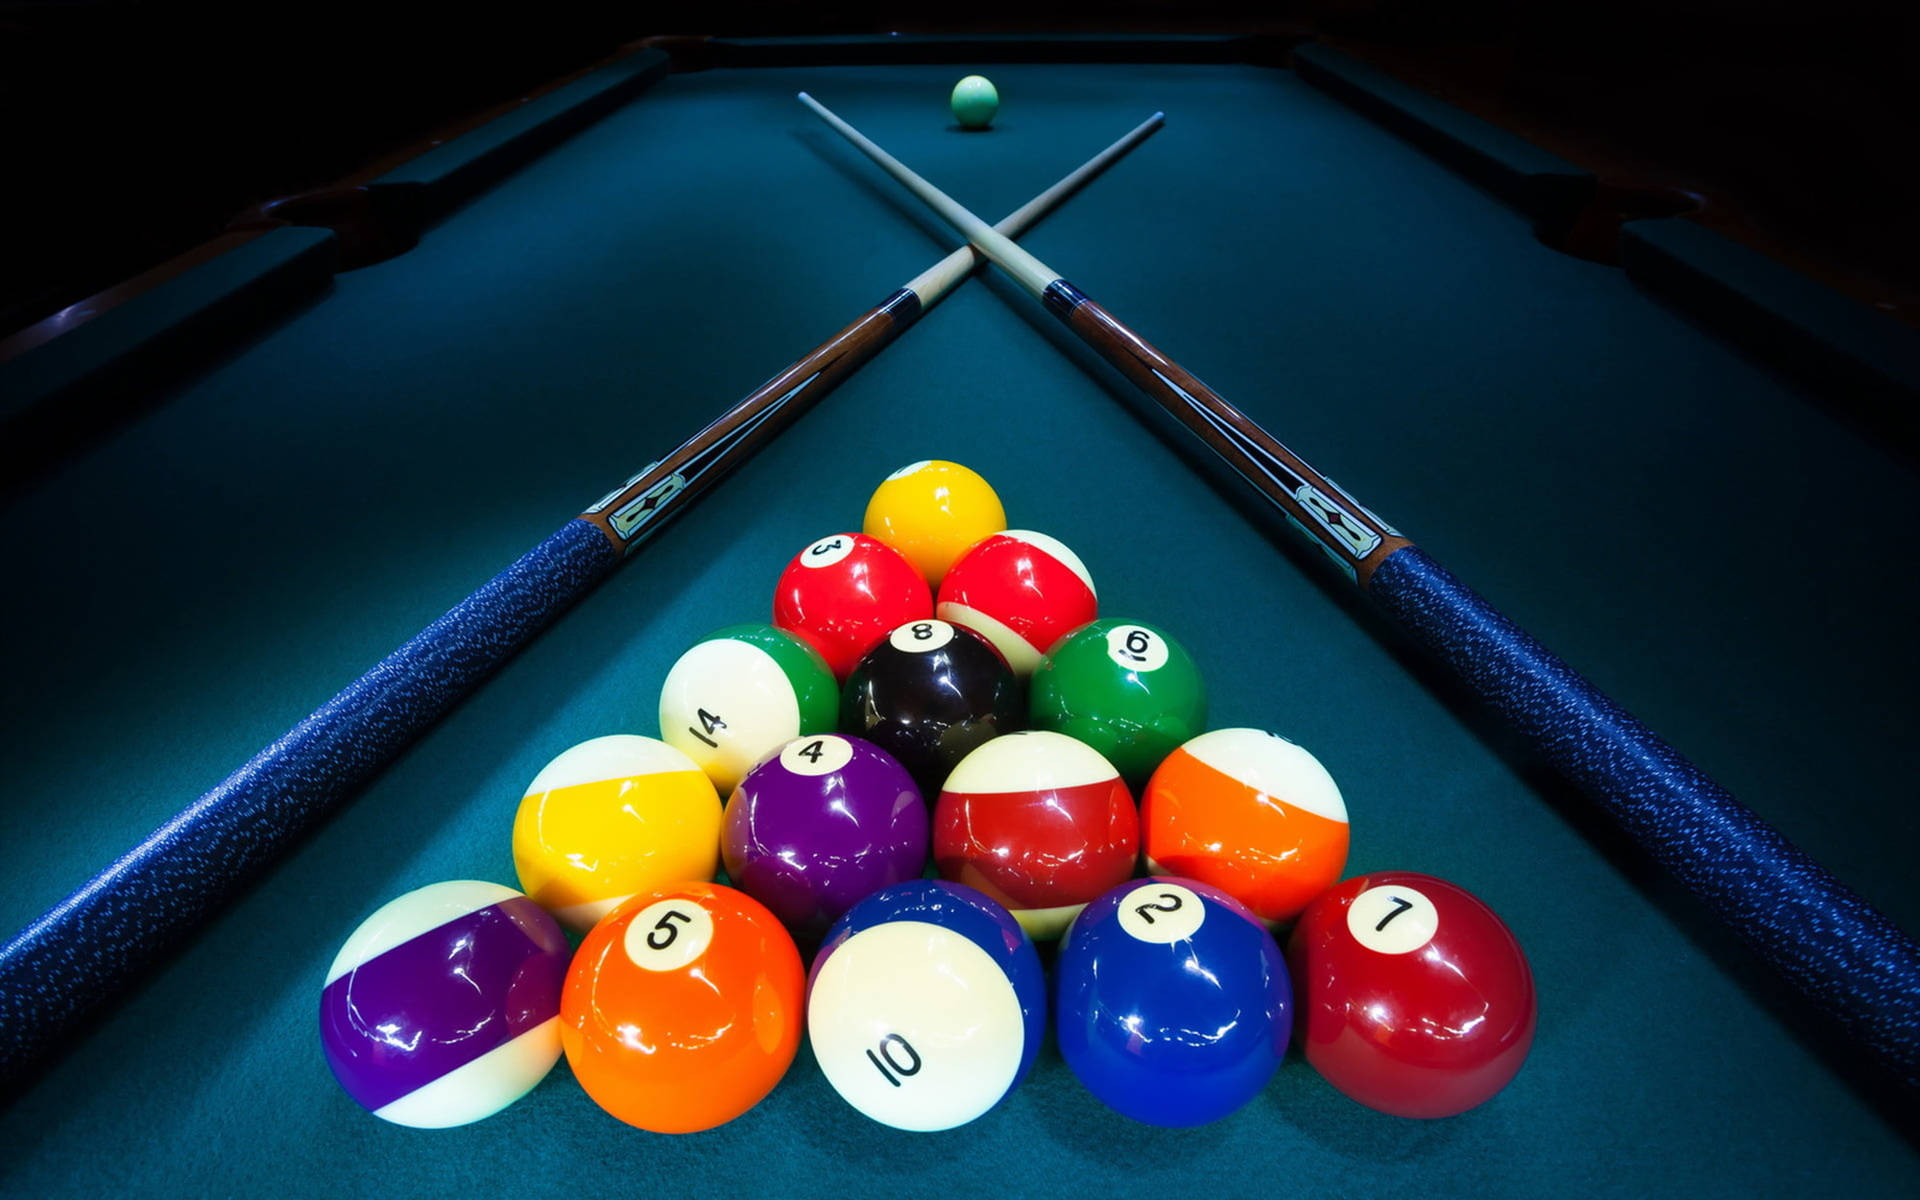 Snooker Balls With Cue Sticks Background